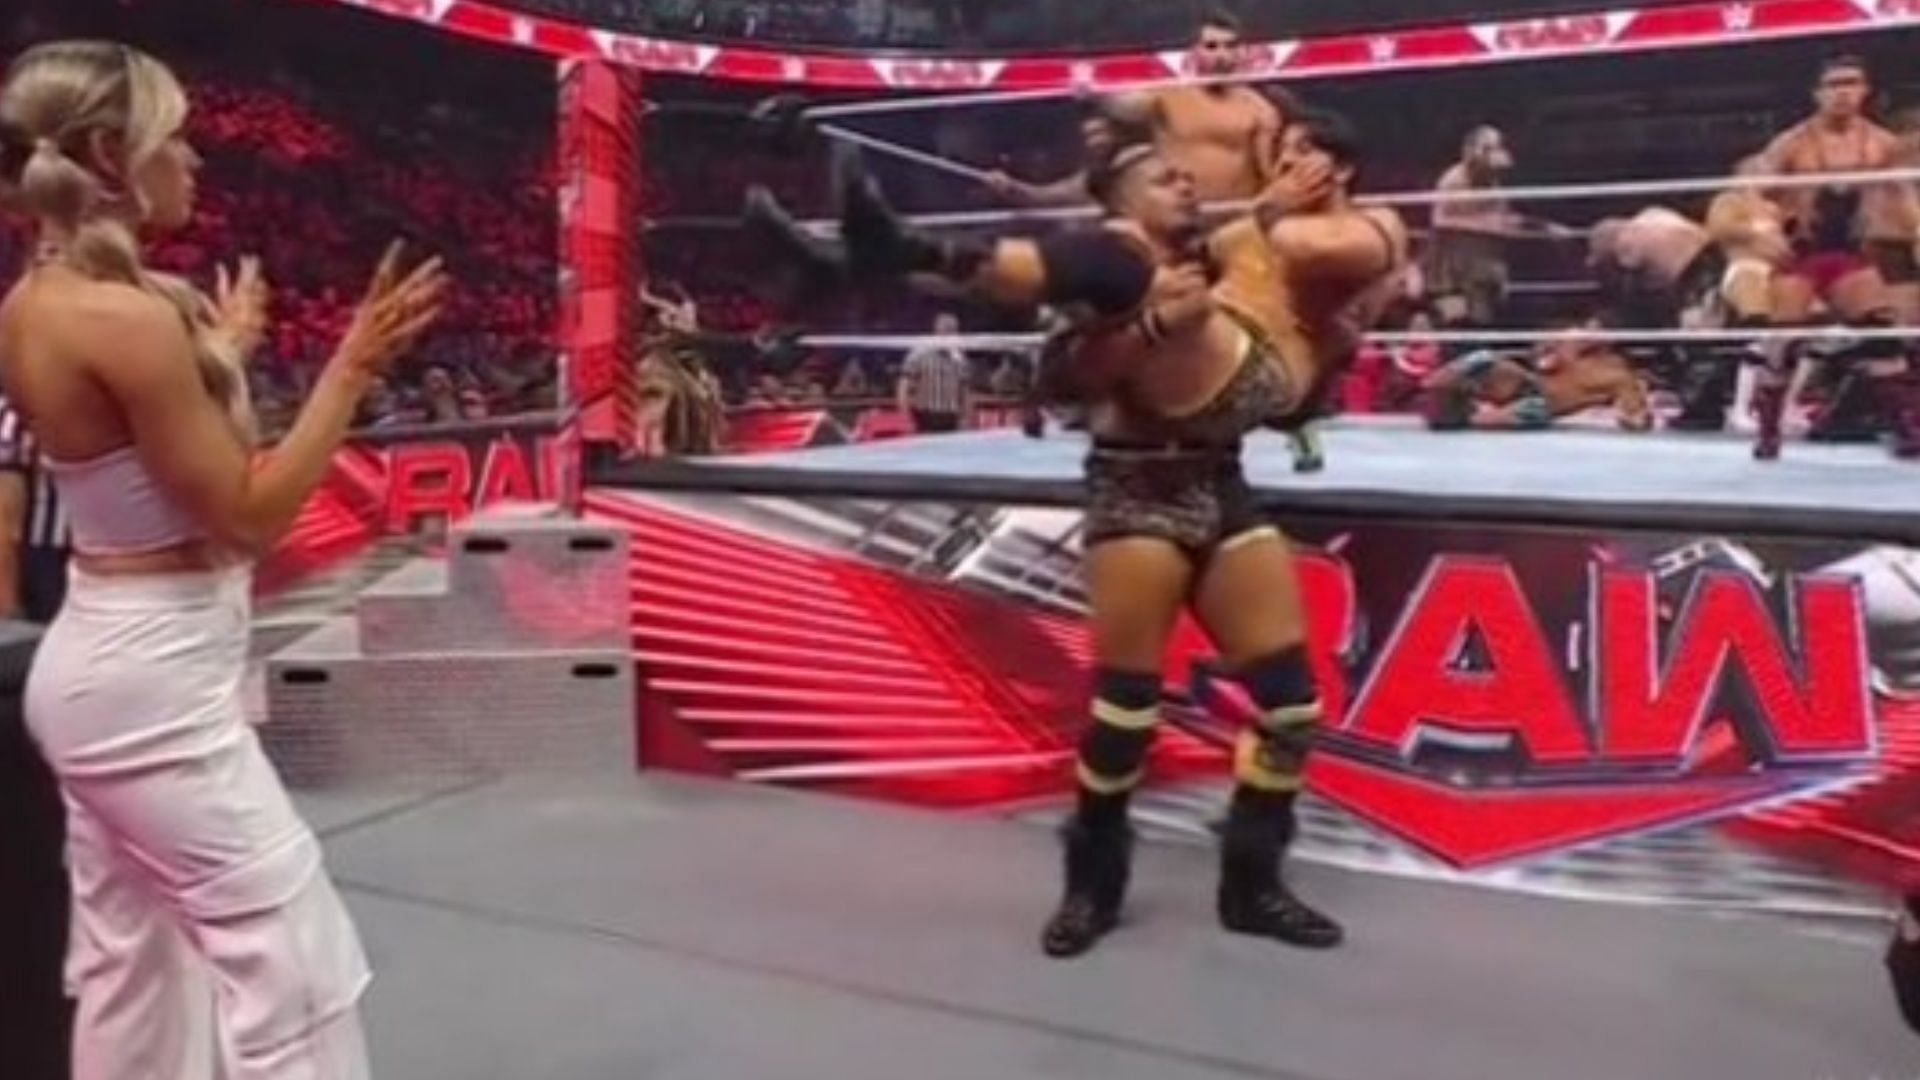 WWE RAW this week featured a battle royal.